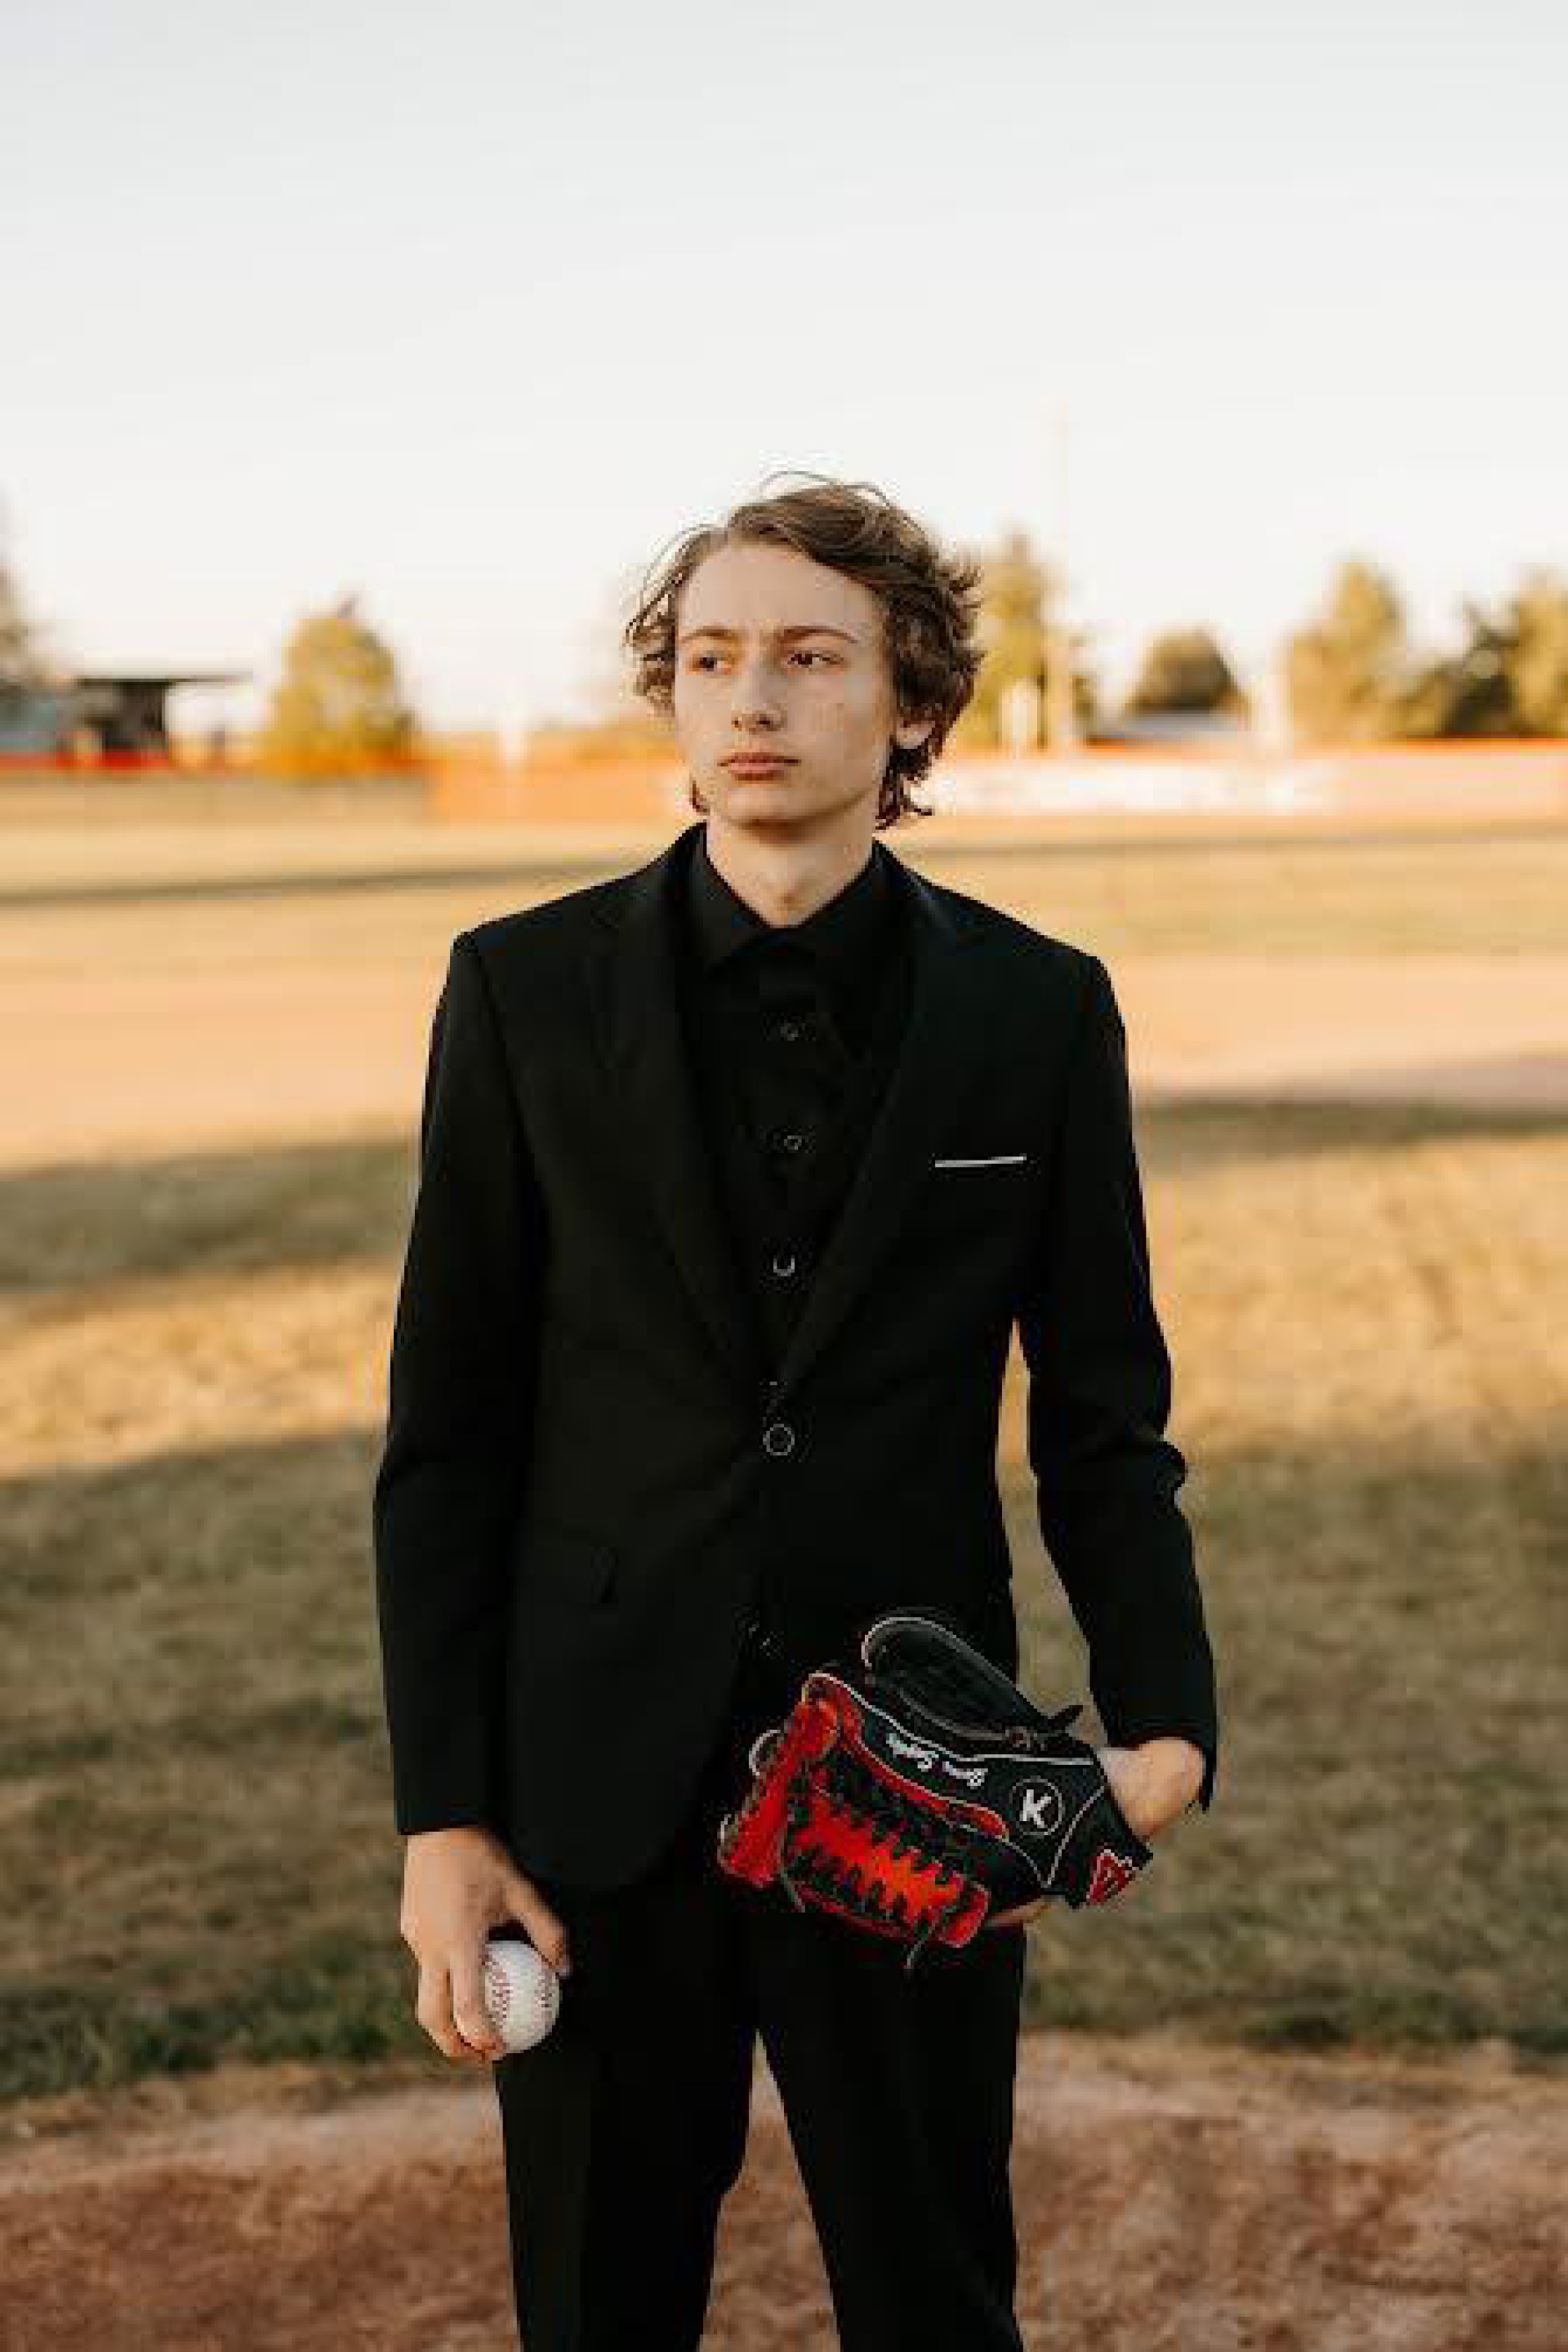 male student posing in field wearing a baseball glove and holding a baseball